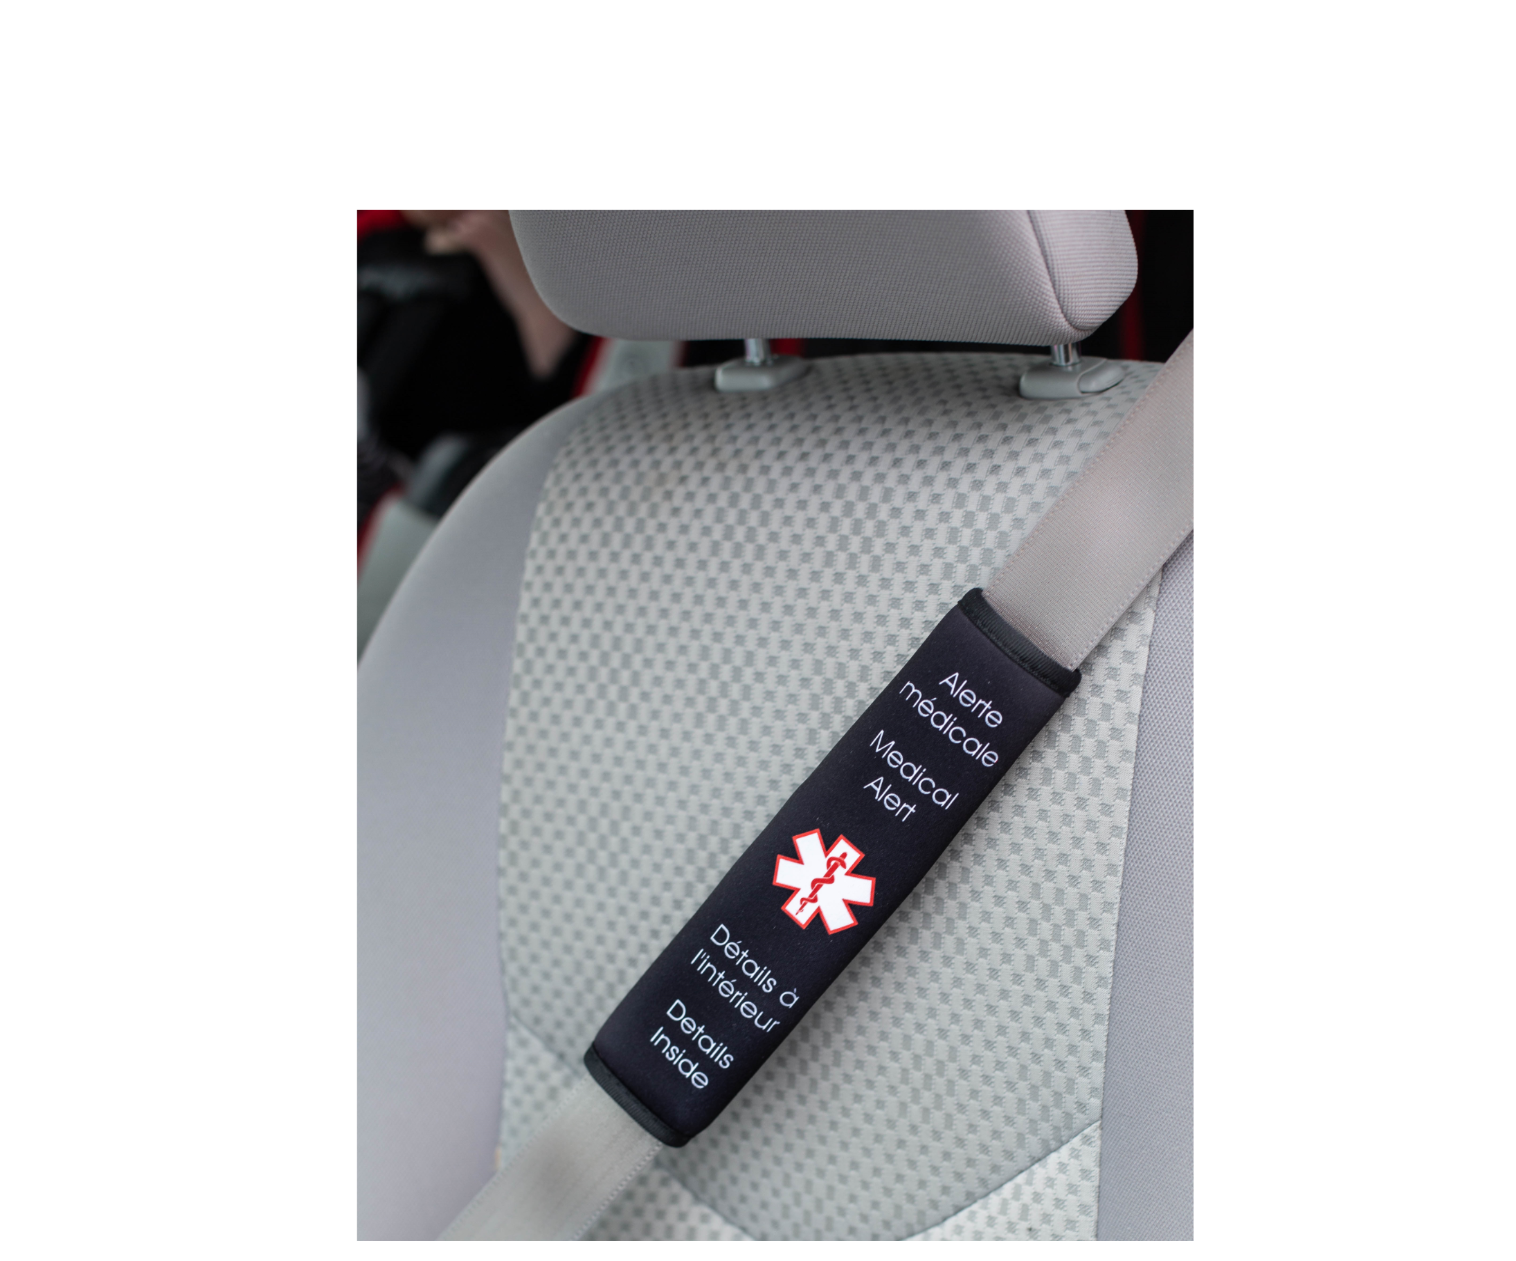 Medical Alert Device for car seat belt - Handy Adapted Products